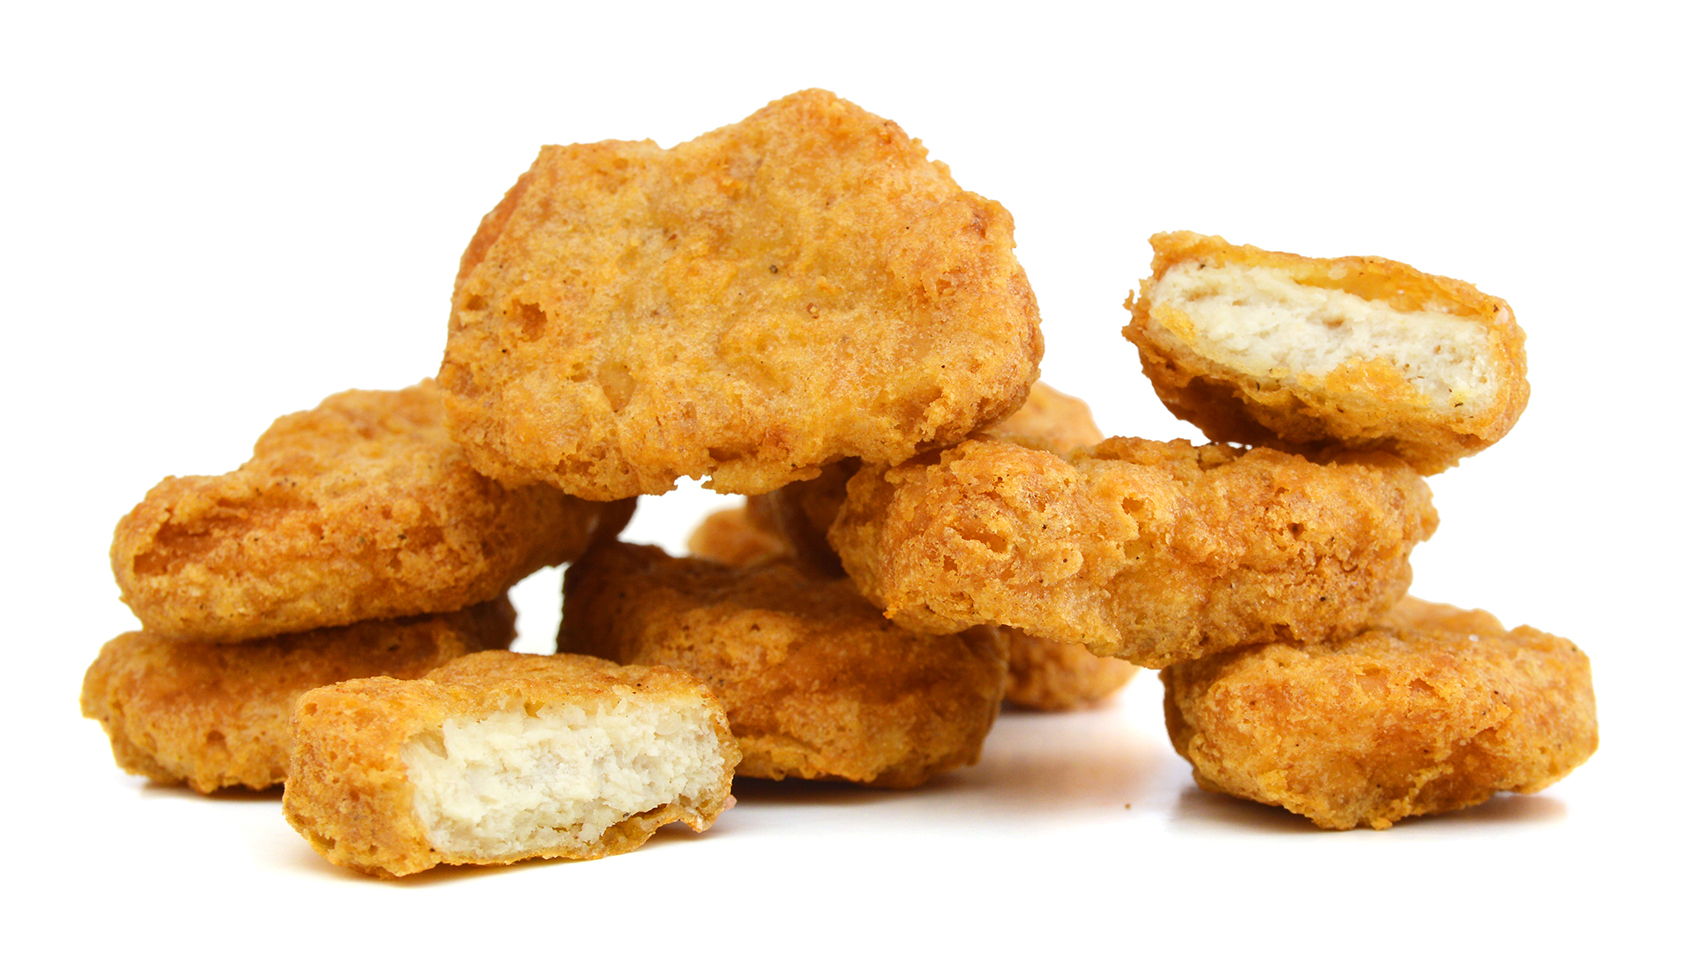 Buy Tyson Fully Cooked Chicken Nuggets, Frozen Chicken Nuggets, 2 Lb